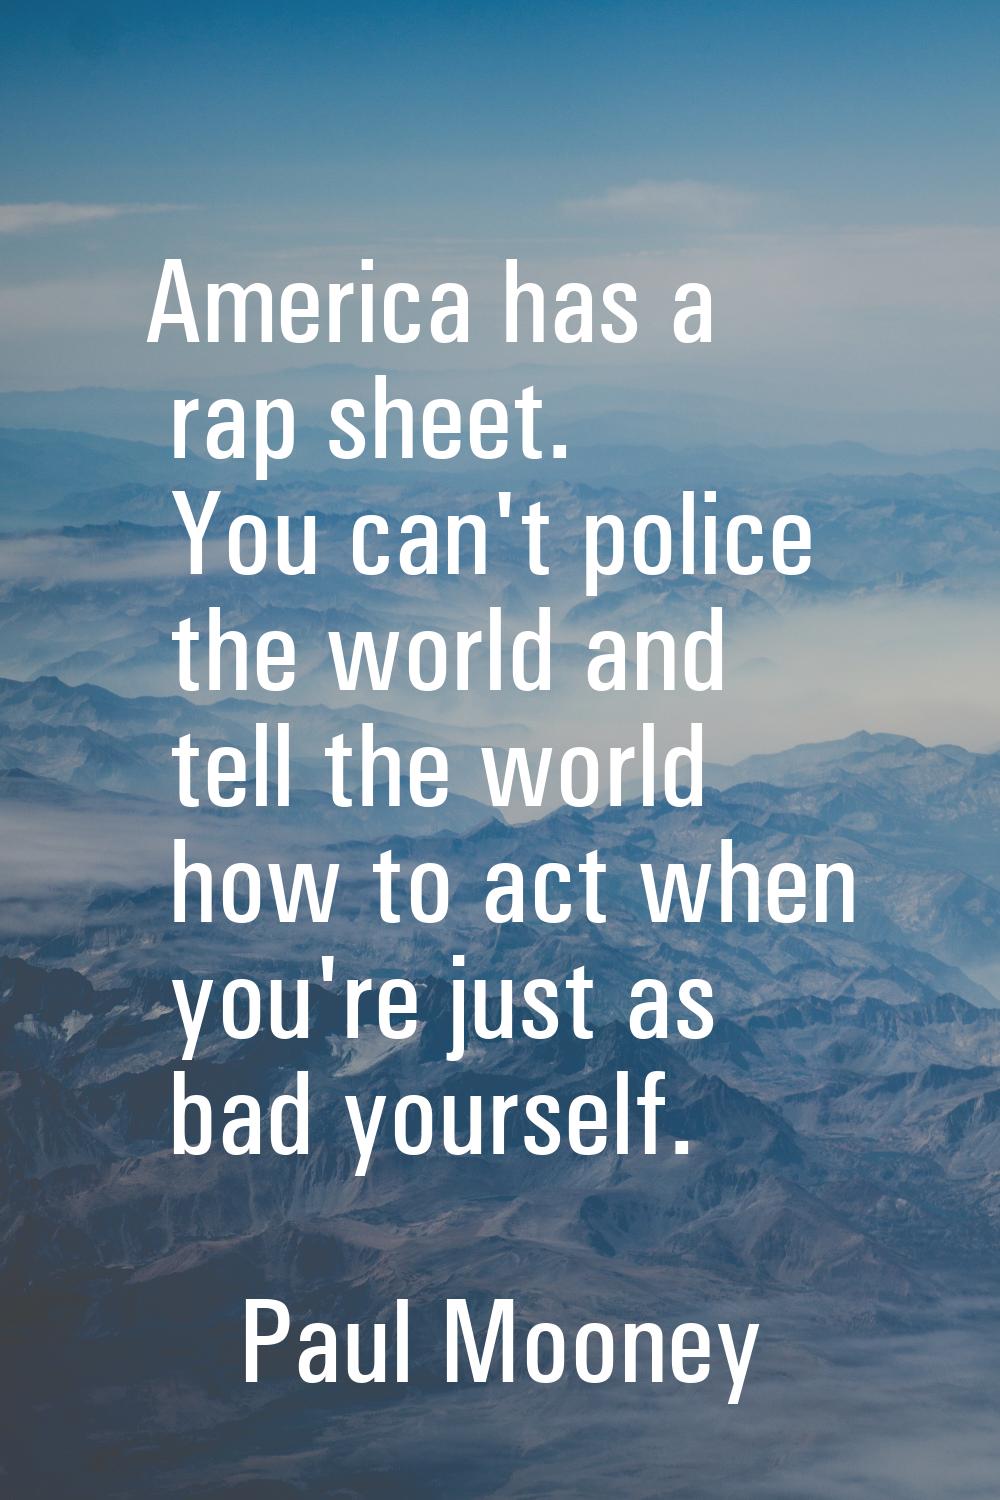 America has a rap sheet. You can't police the world and tell the world how to act when you're just 